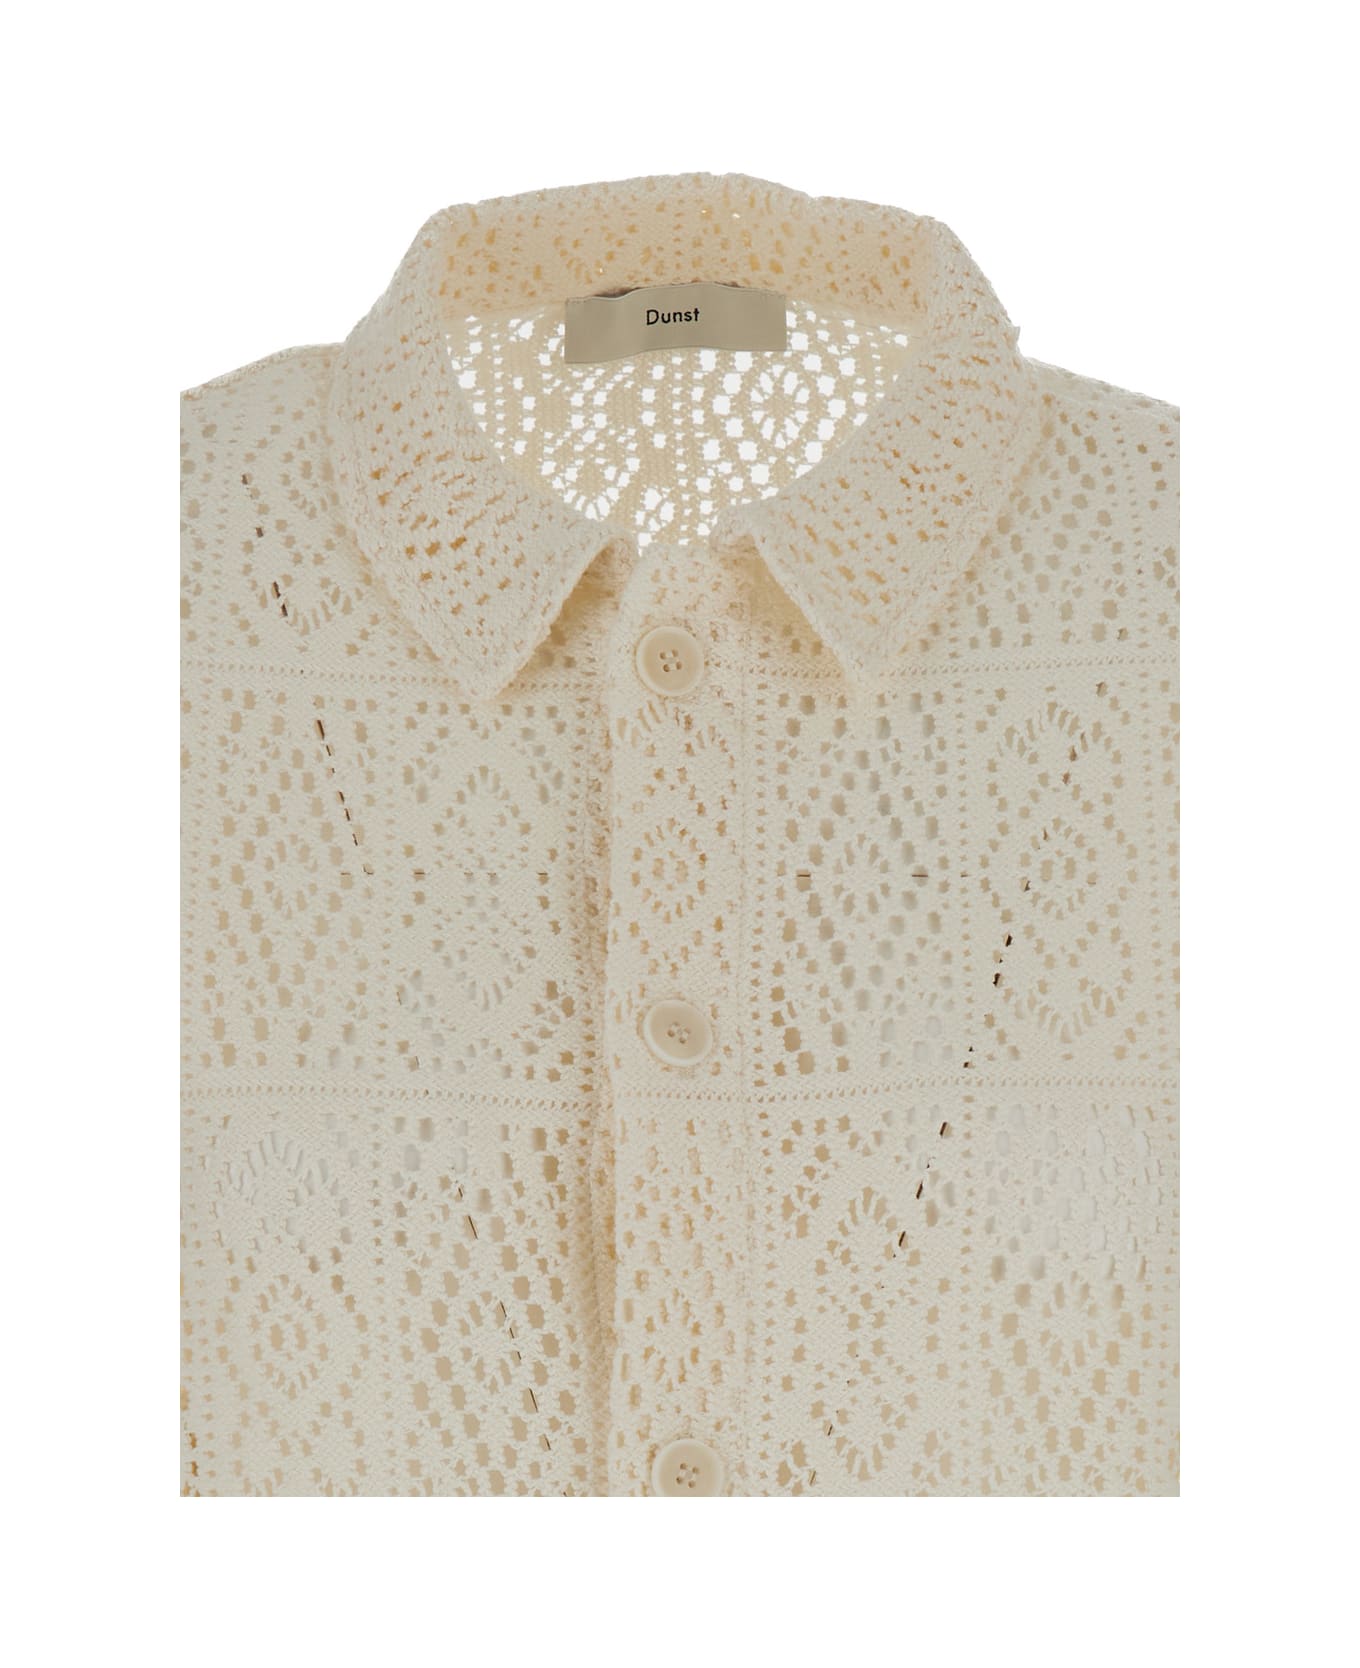 Dunst White Open Knit Work Shirt In Cotton Blend Woman - White シャツ